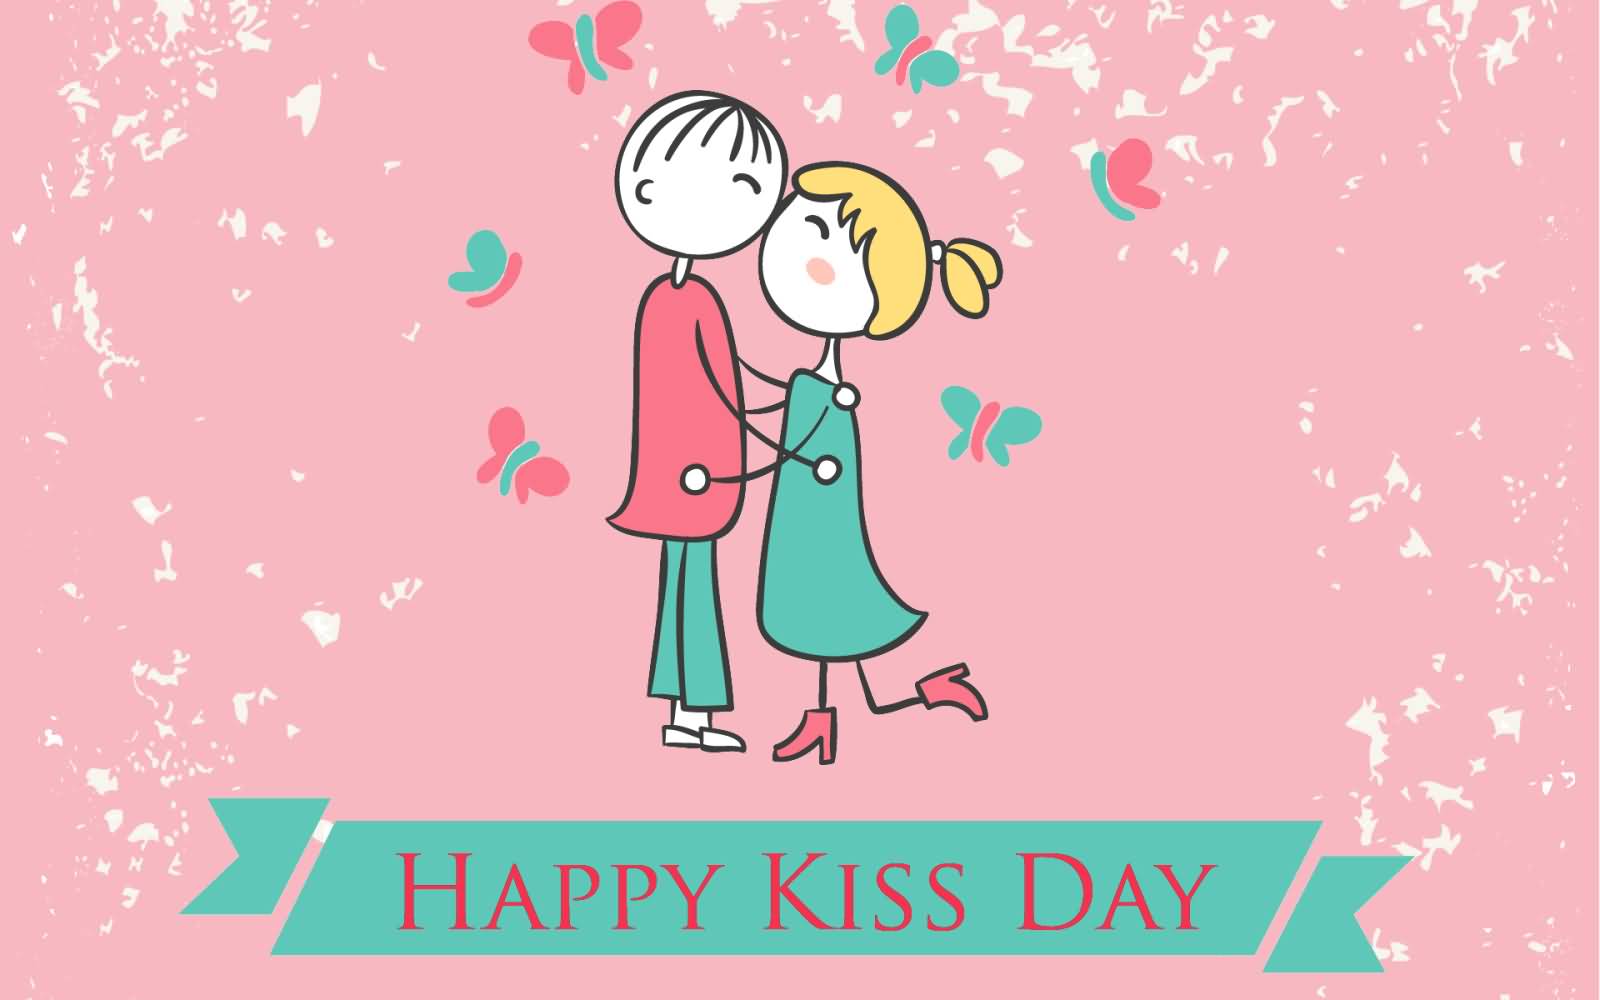 Best Kiss Day 2017 Greeting Picture And Image